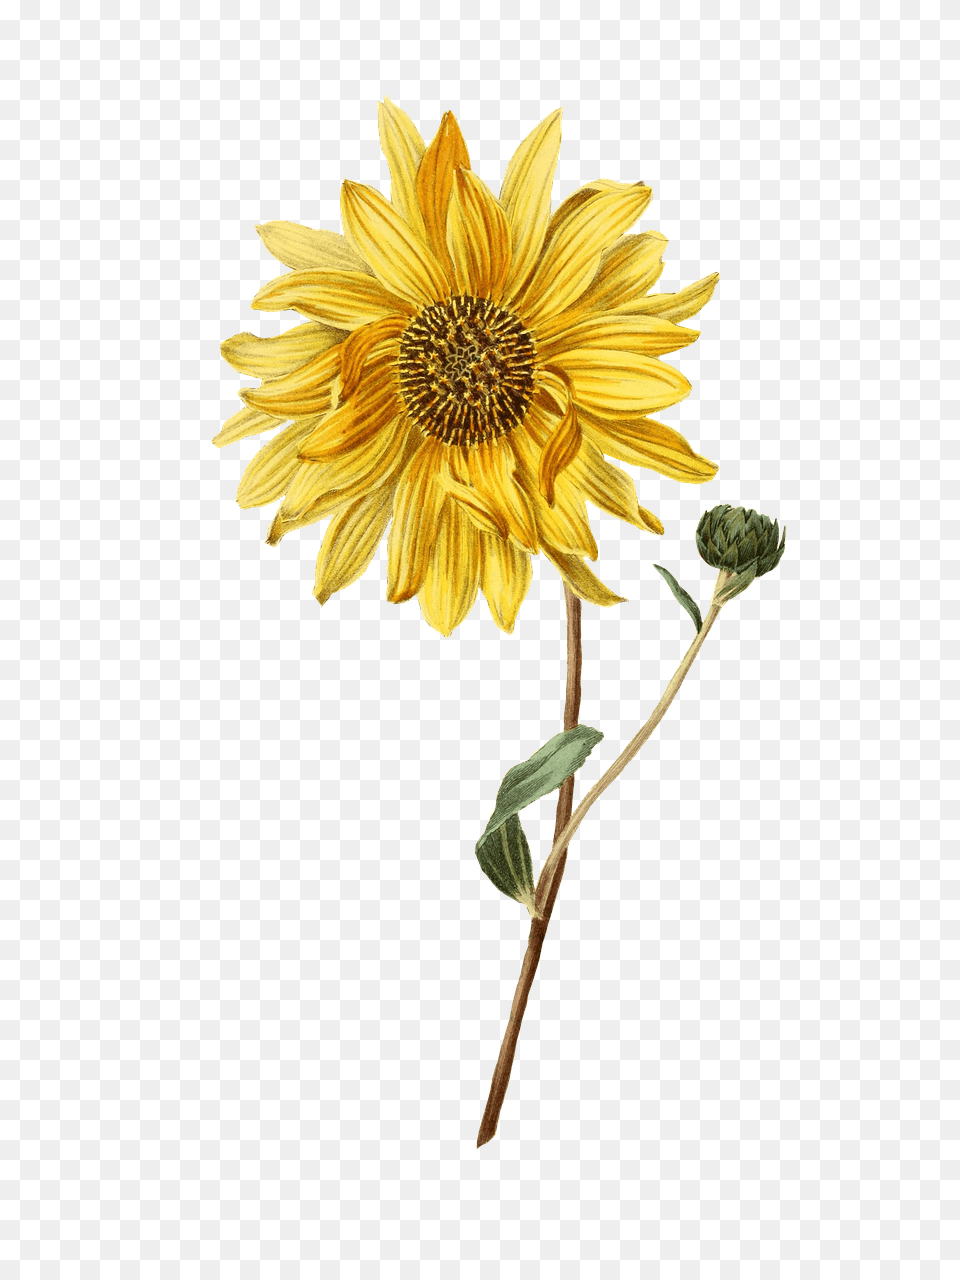 Sunflower And Bud, Flower, Plant, Daisy Free Transparent Png